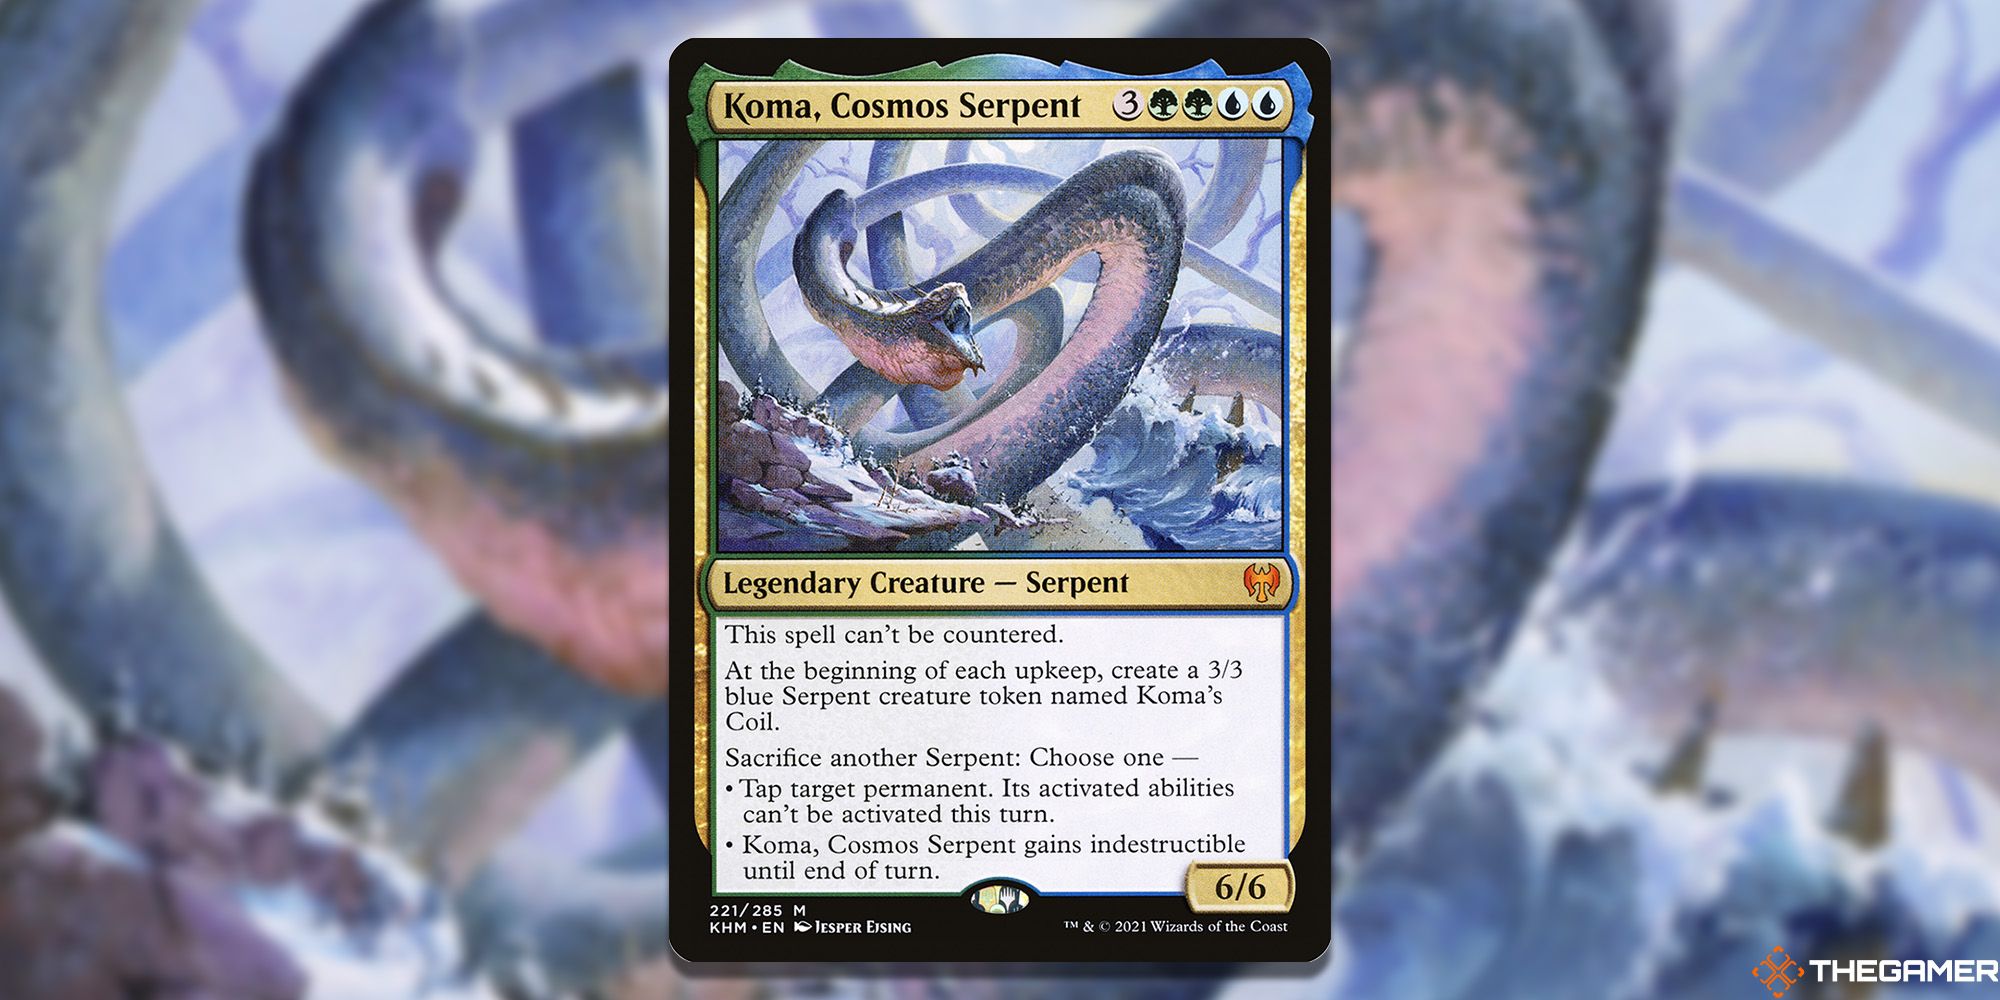 Koma, Cosmos Serpent Magic: The Gathering card overlaid over artwork.